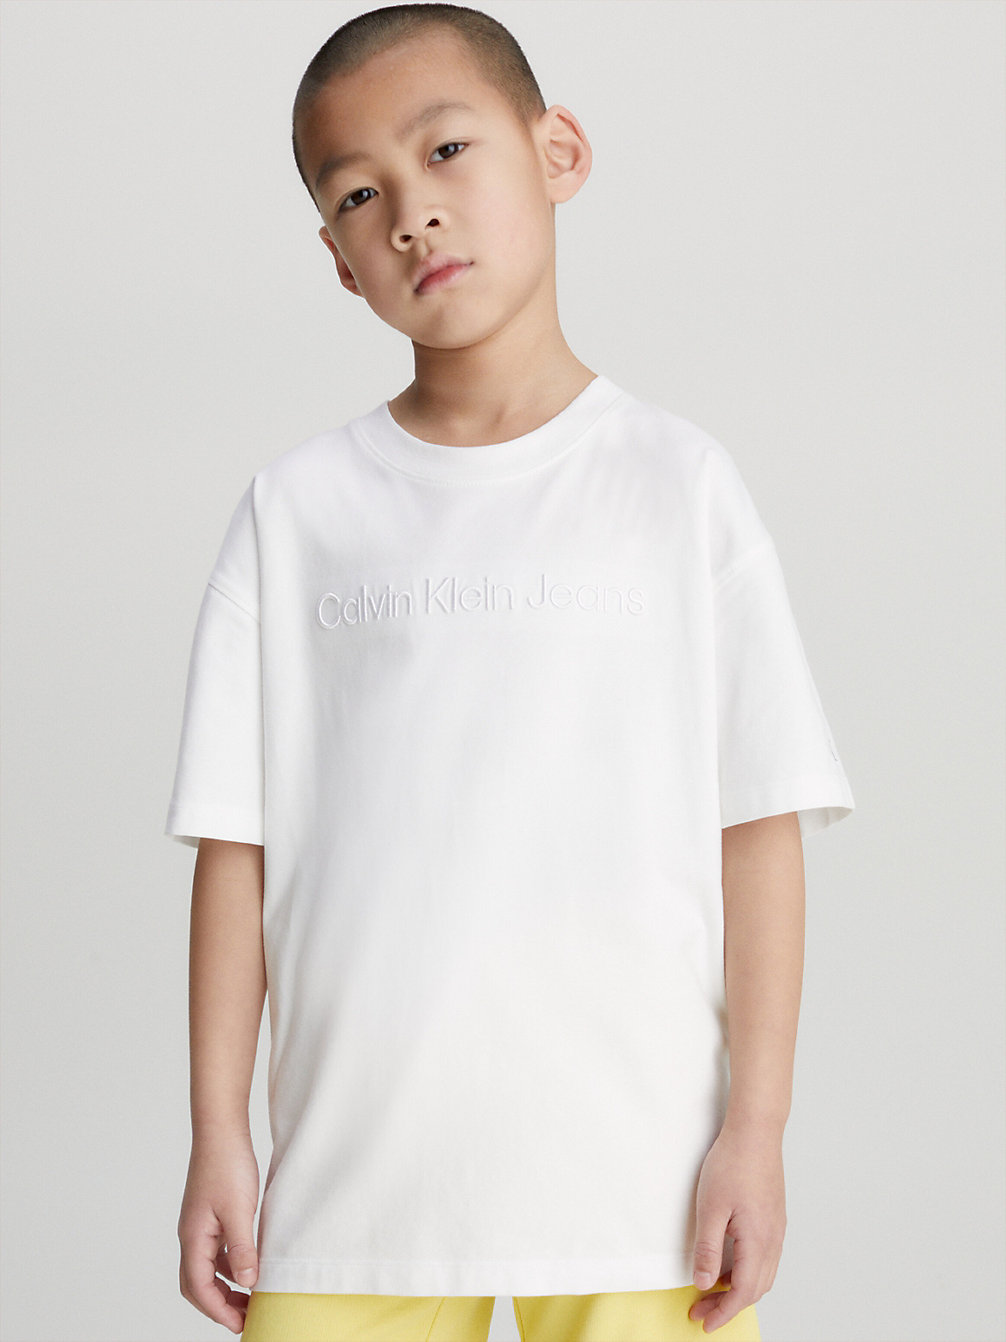 BRIGHT WHITE Relaxed Logo T-Shirt undefined boys Calvin Klein